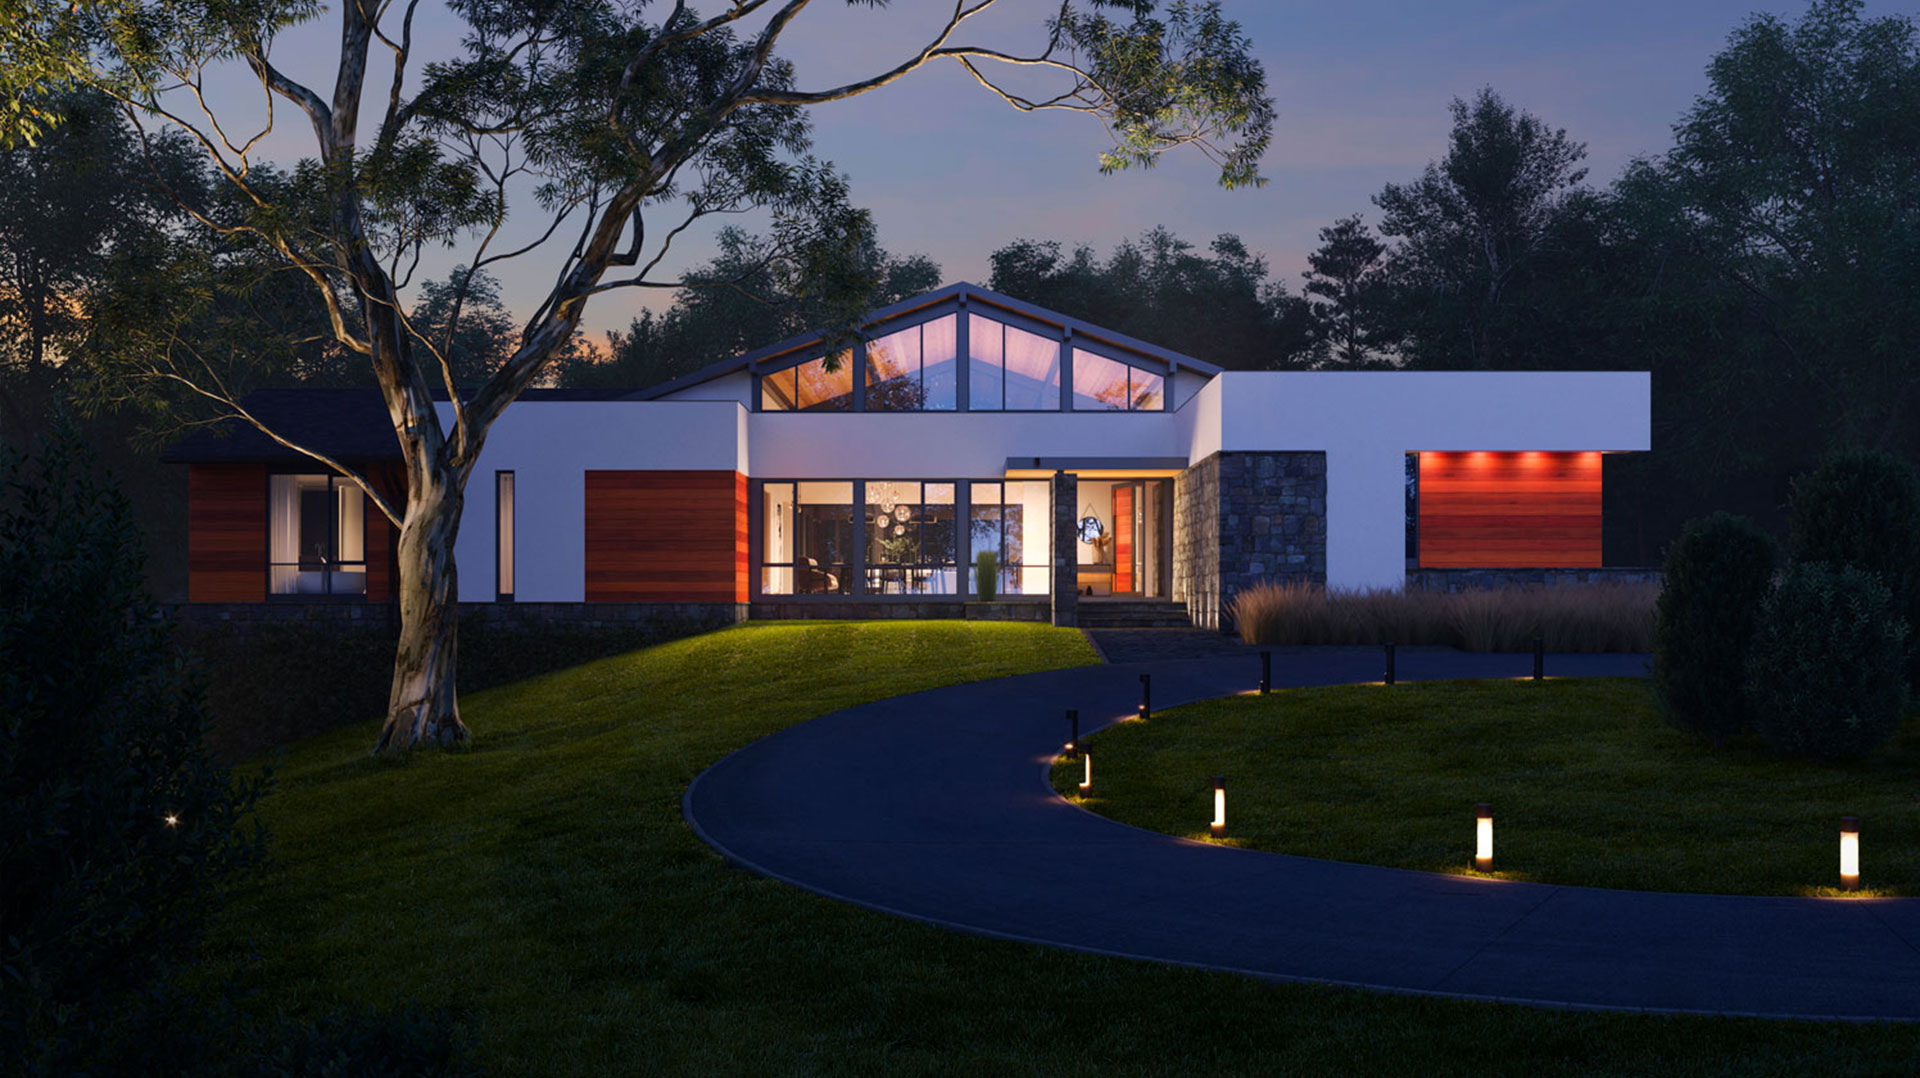 An image of California Modern style custom home illuminated against the night sky, situated in a heavily wooded setting.